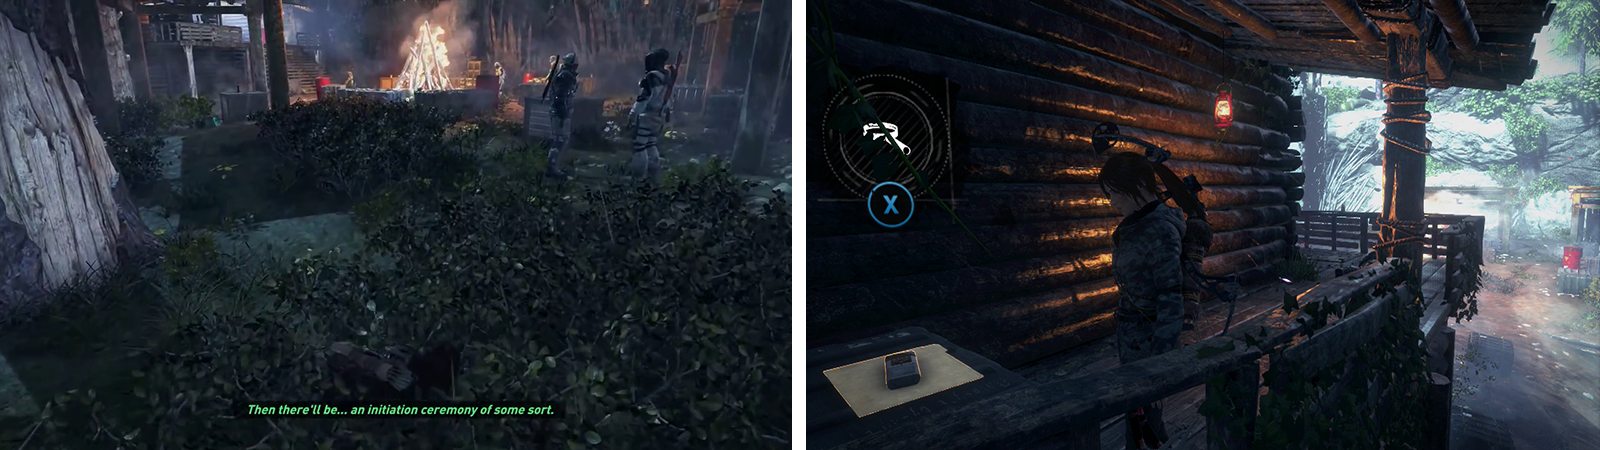 After clearing the third group of enemies (left), loot the area of collectibles including Document 25 (right).